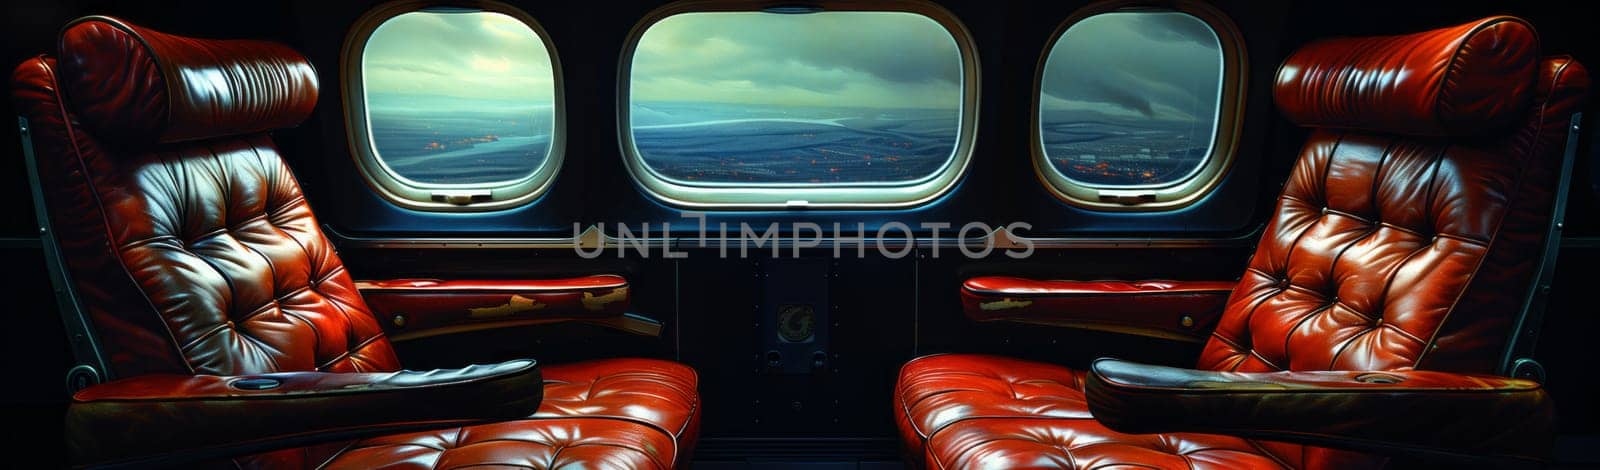 the inside of an airplane with two red seats and a window by richwolf